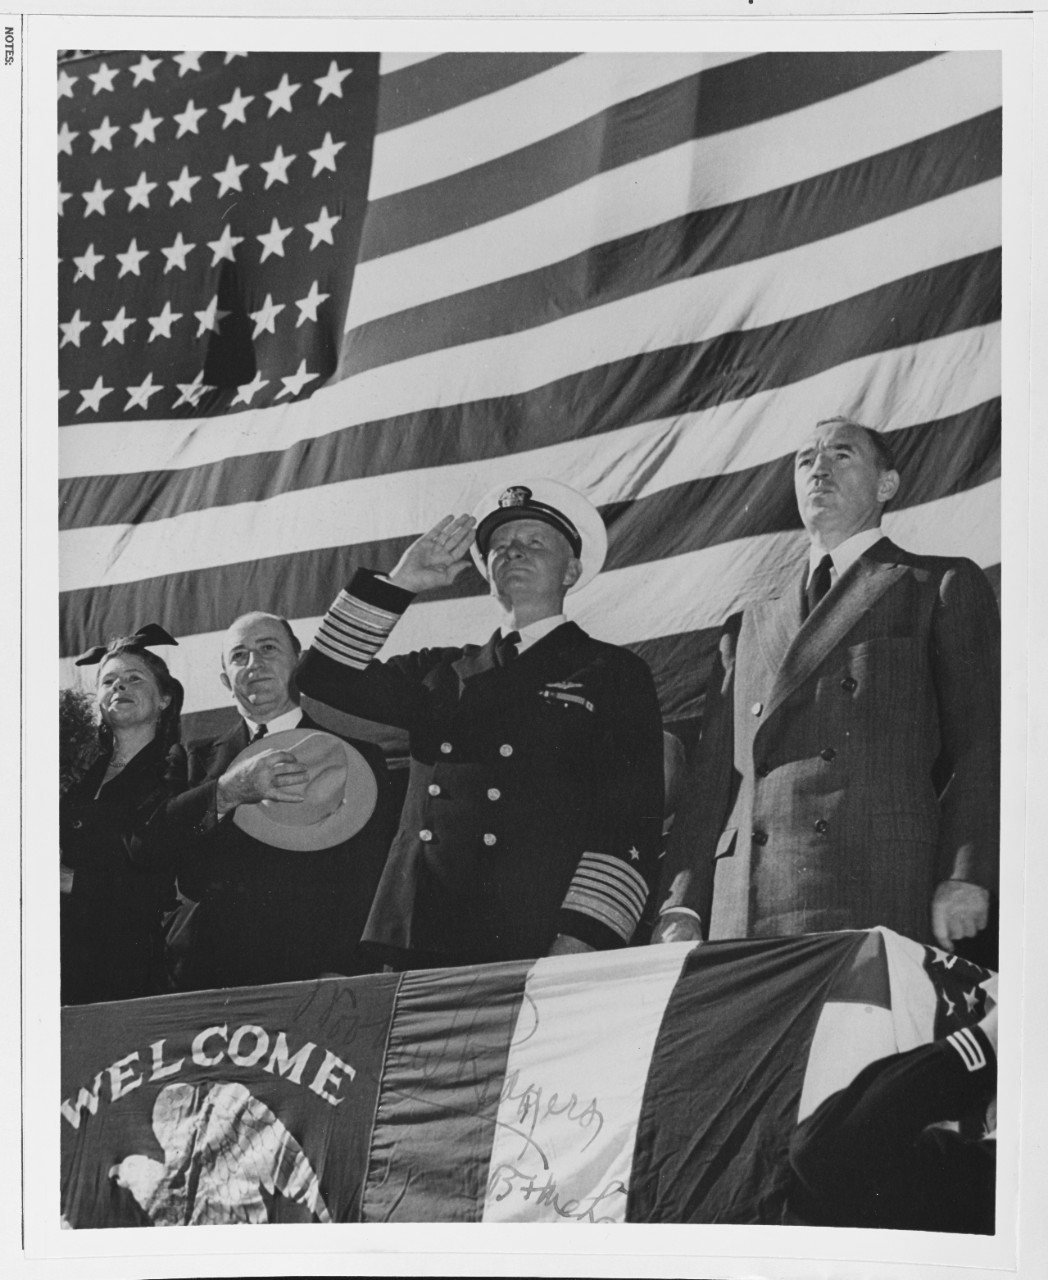 Fleet Admiral Chester W. Nimitz, USN, is shown saluting the colors at a post-war parade in his honor.